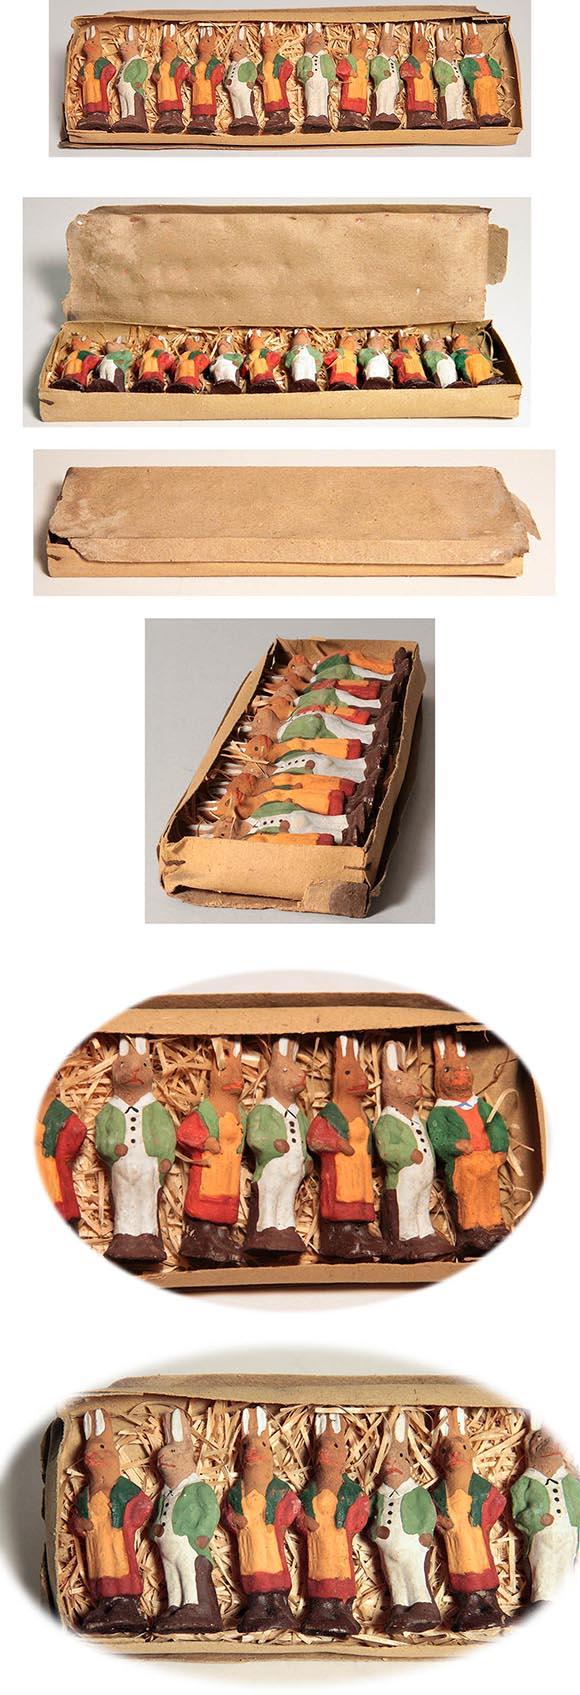 c.1920 Germany, 12 Composition Easter Bunny Figures in Original Box